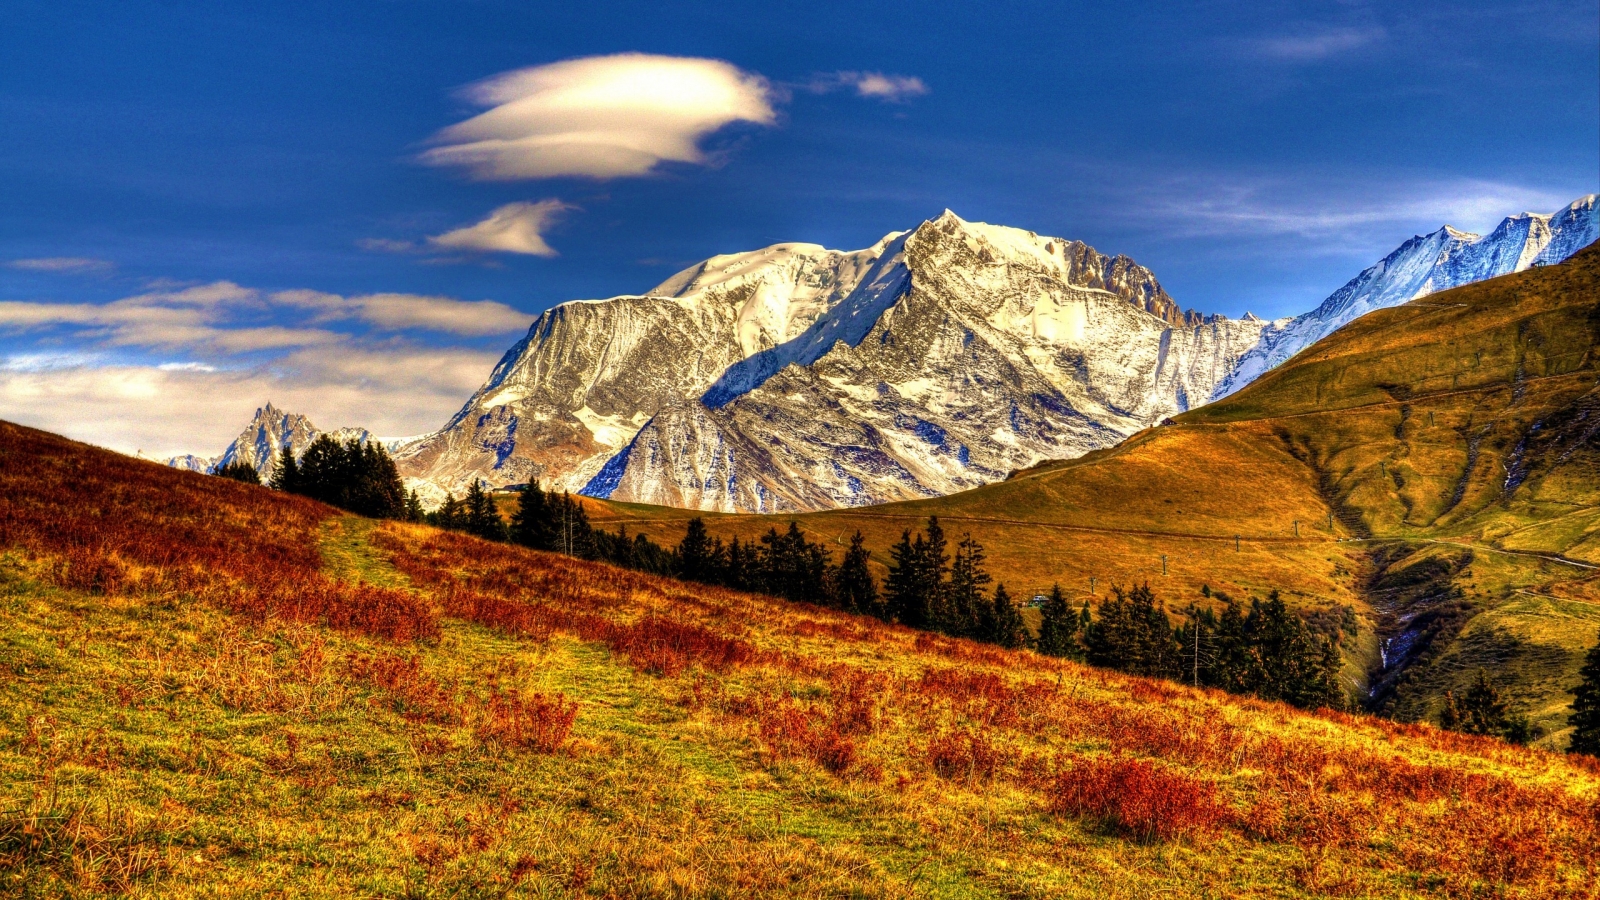 HDR Mountain Landscape for 1600 x 900 HDTV resolution